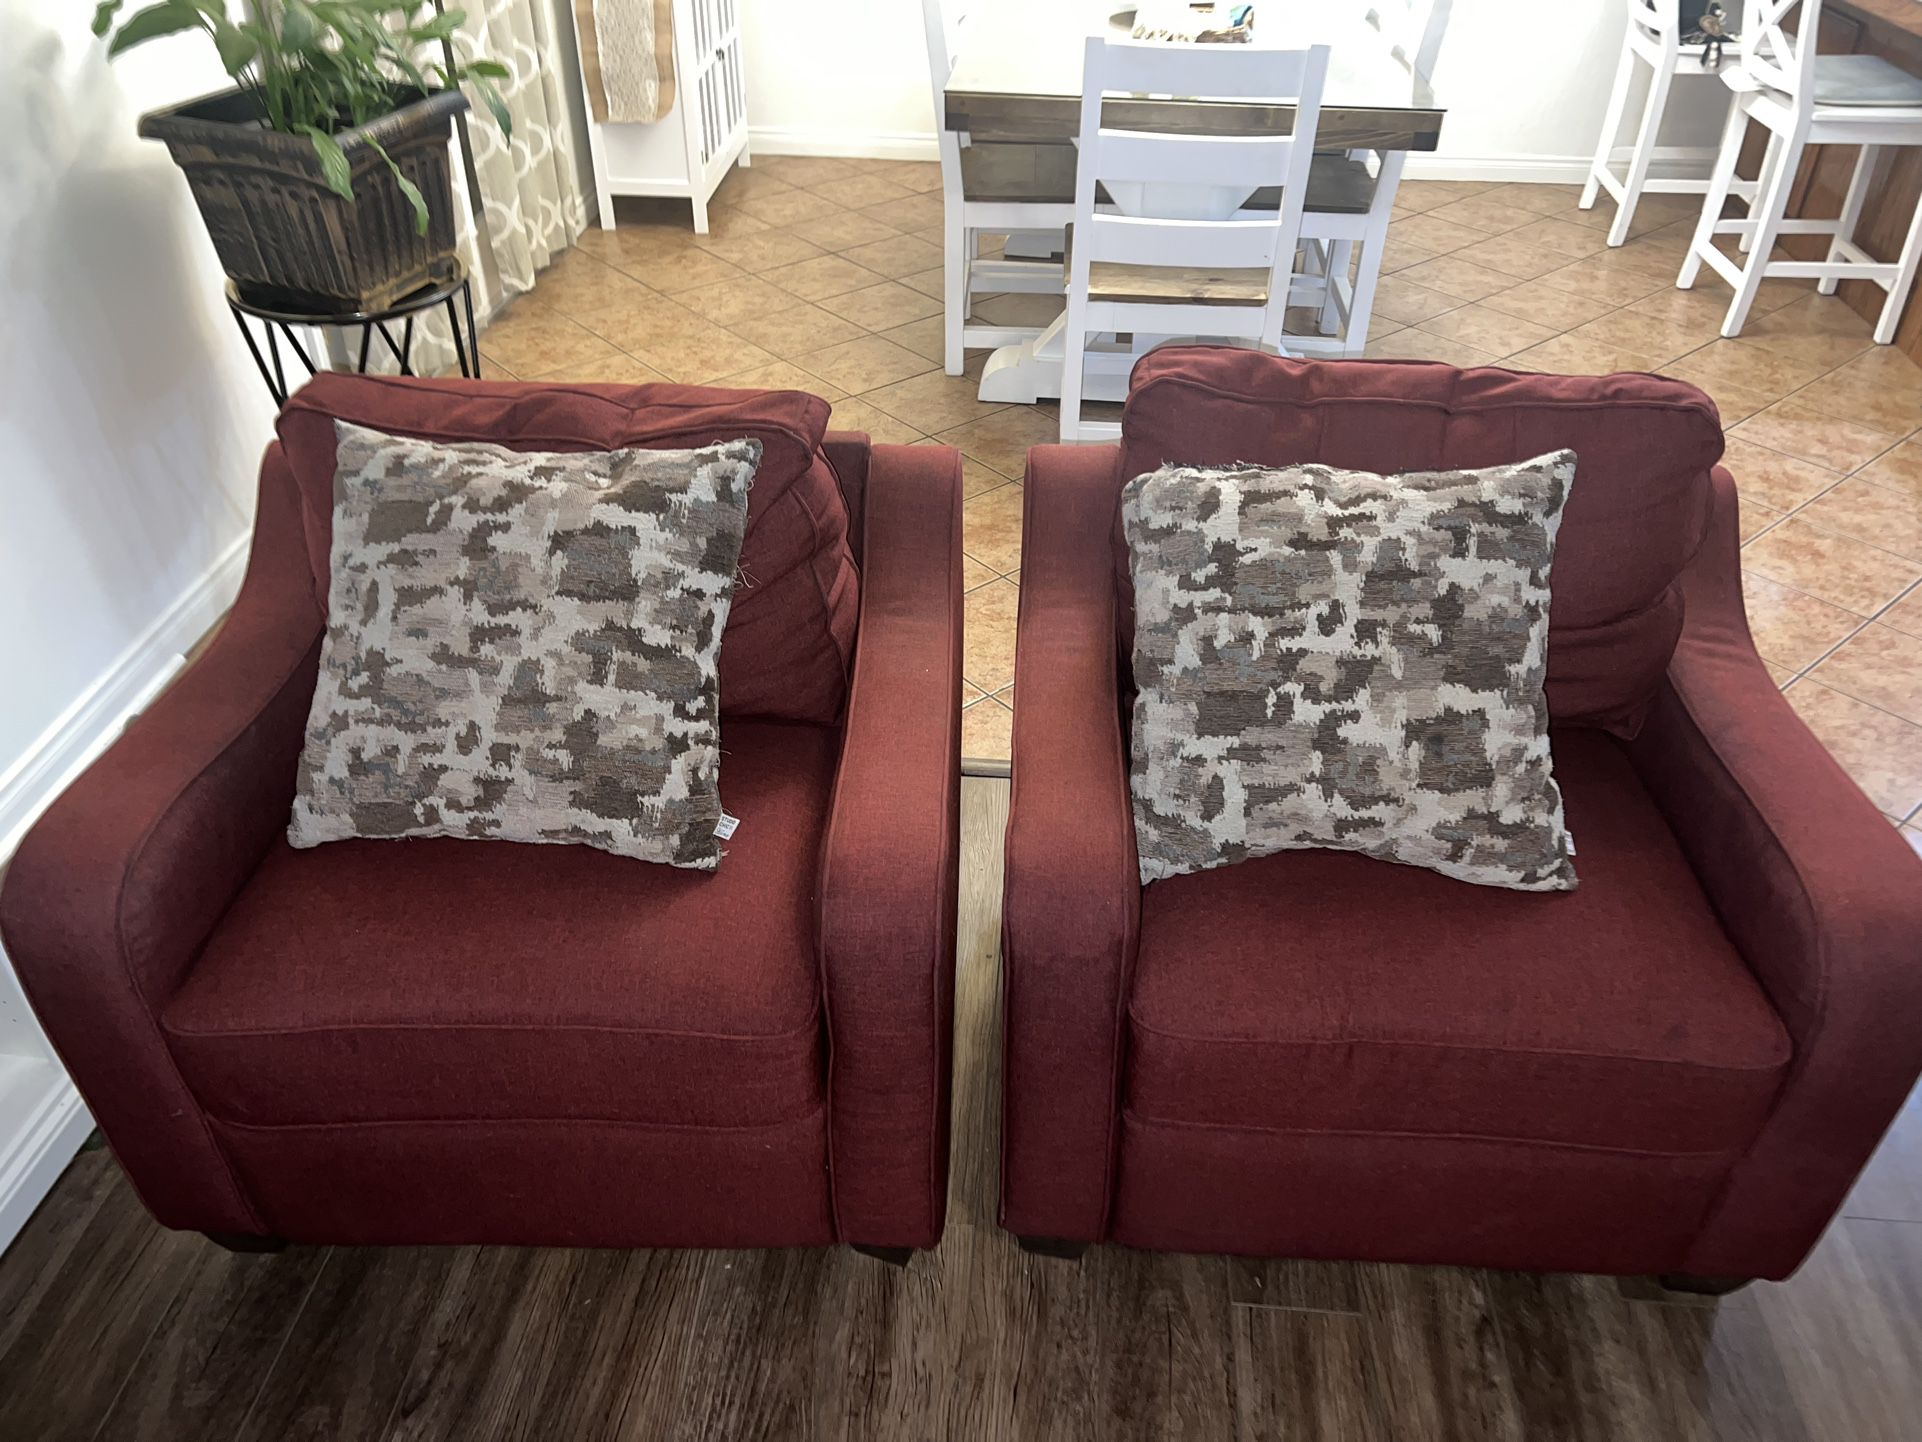 2 Red single couches 